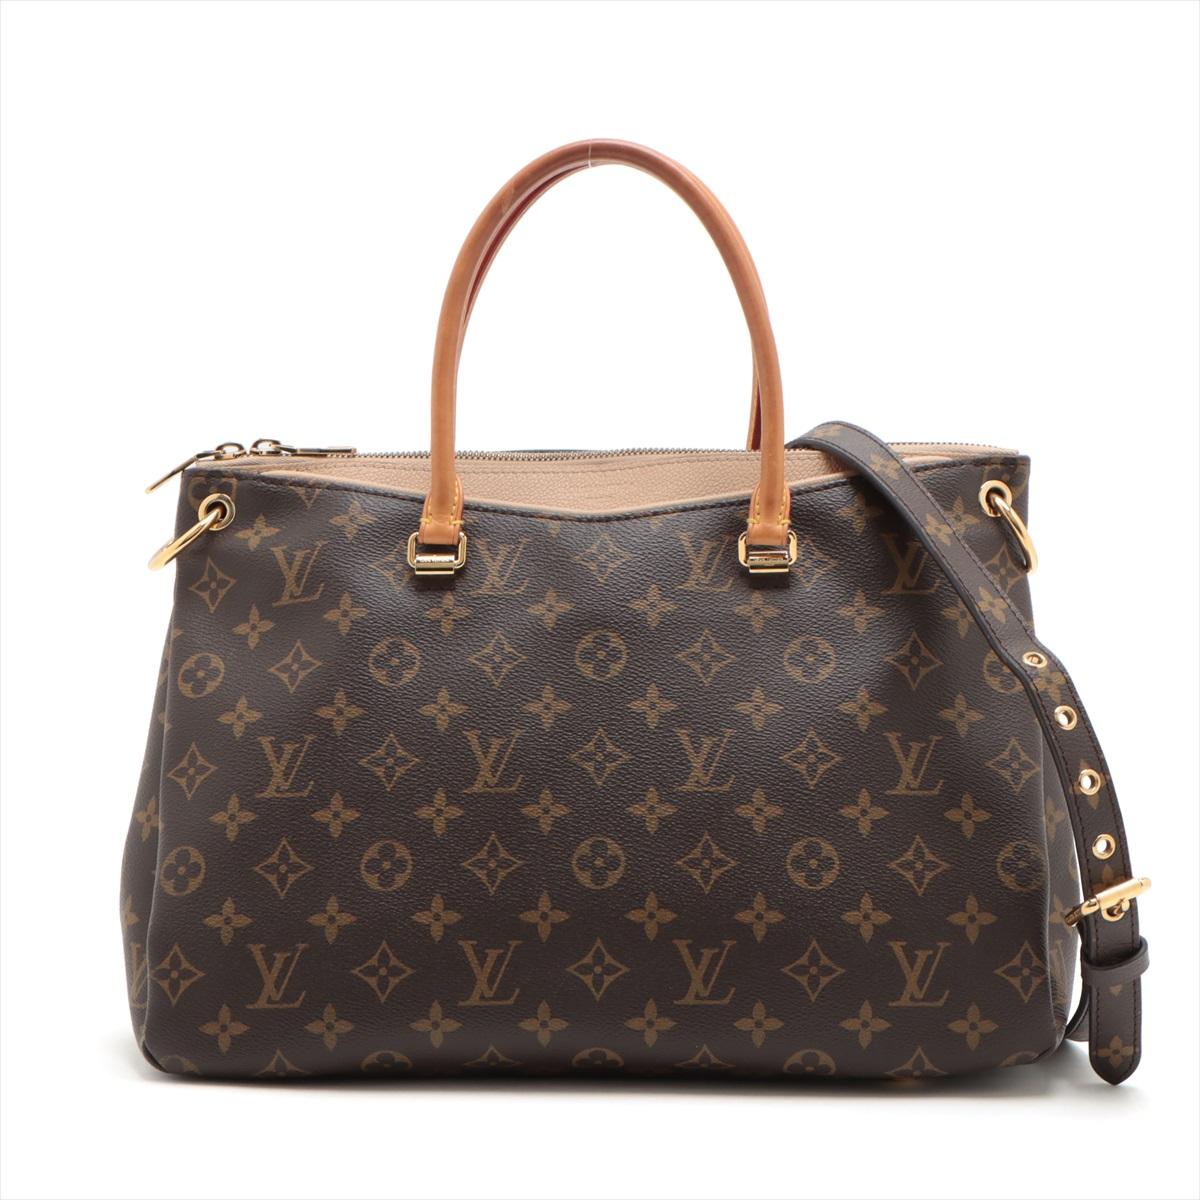 The Louis Vuitton Monogram Pallas Beige MM is an elegant and versatile handbag designed for the modern woman on the go. Crafted from the iconic Monogram canvas combined with supple calf leather, the bag exudes sophistication and luxury. Its spacious